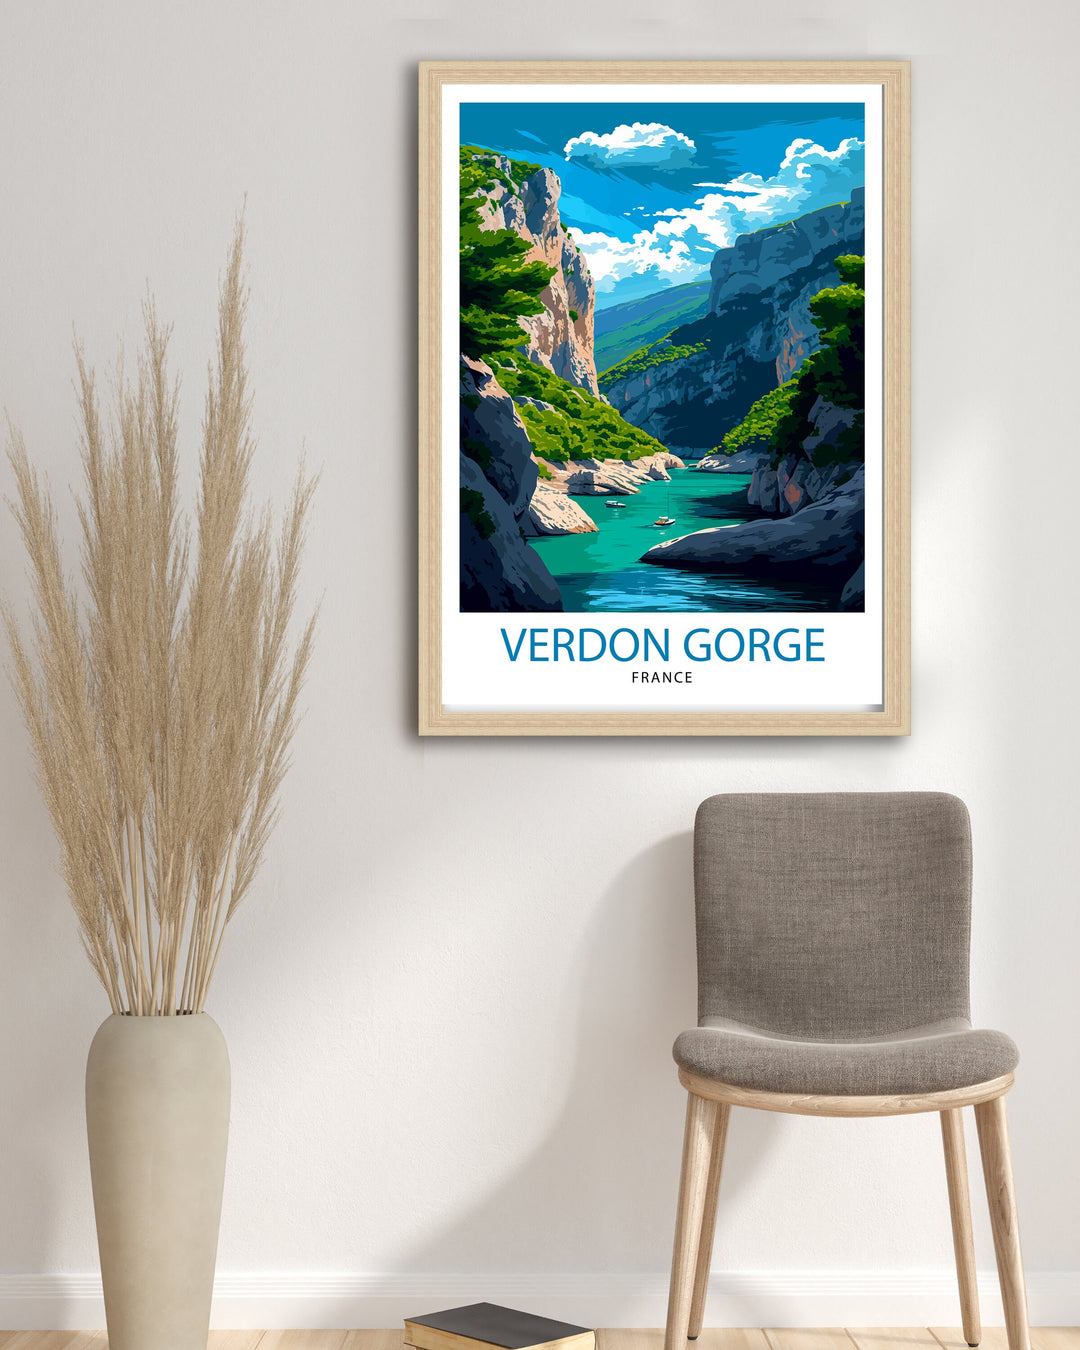 Verdon Gorge France Print Stunning Canyon Art Provence Landscape Poster Turquoise River Wall Decor French Riviera Illustration Outdoor